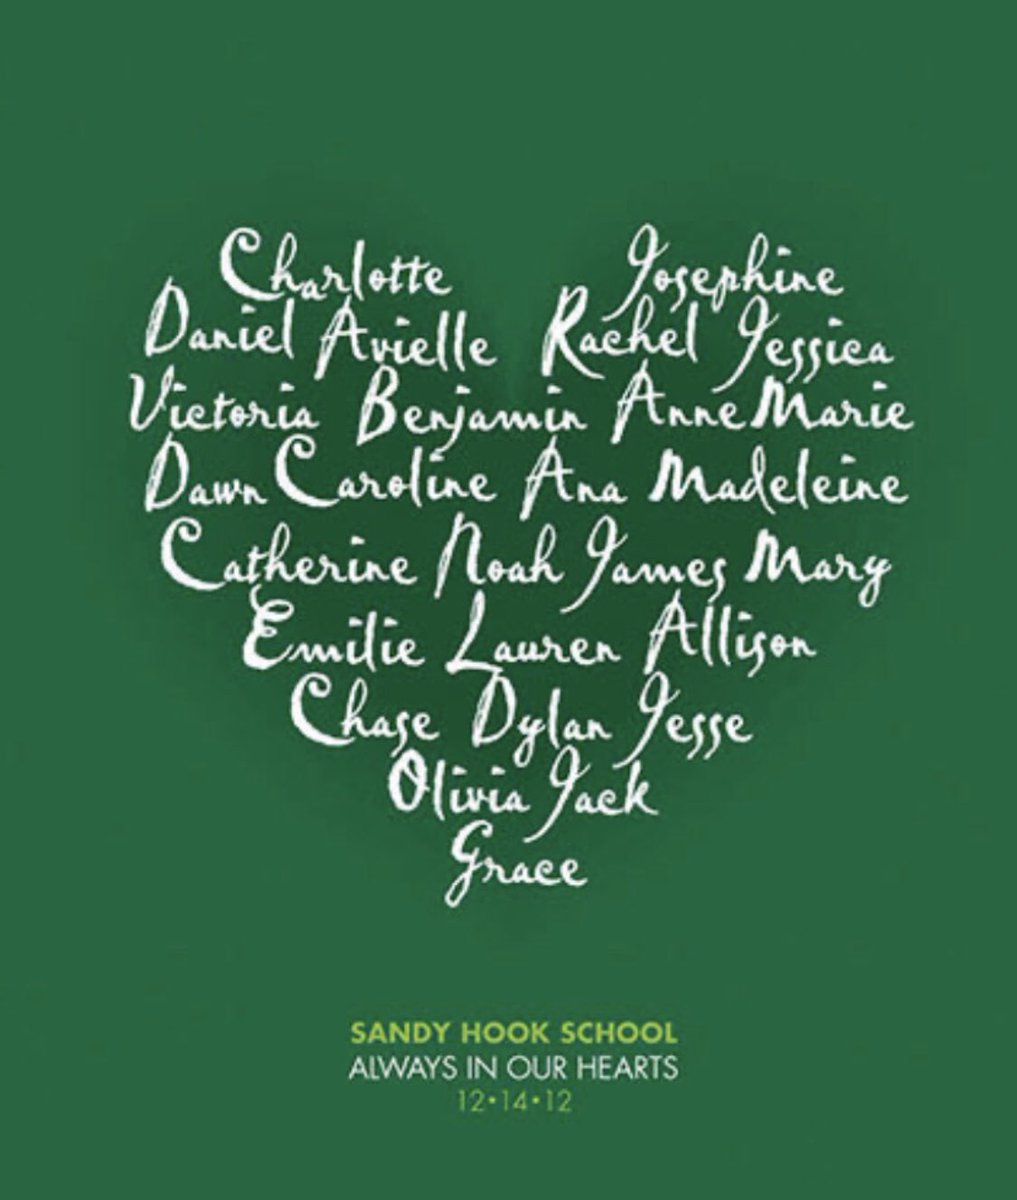 7 years ago...one of the scariest and saddest days in my hometown community. RIP Angels. #sandyhookstrong 💚💚💚💚💚